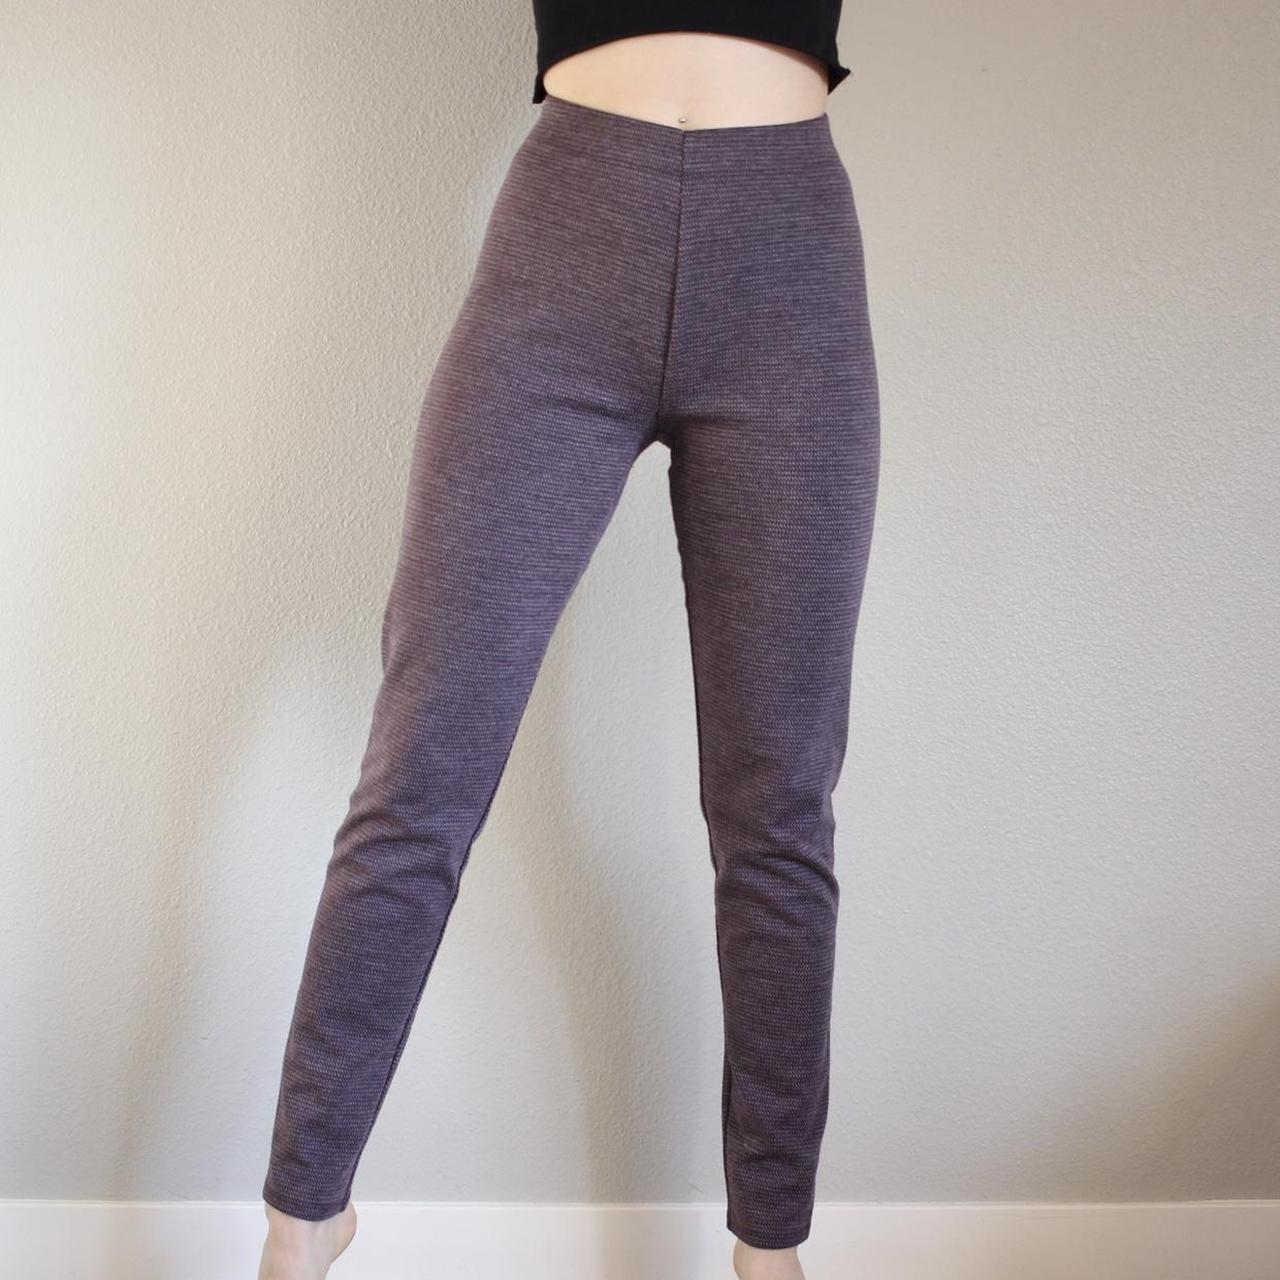 Buy Gradient Knit Leggings for Woman / Adult Knit Pants / Ombre Leggings /  Slim Fit Knitted Pants / Gray Charcoal White / Warm Woman Leggings Online  in India - Etsy